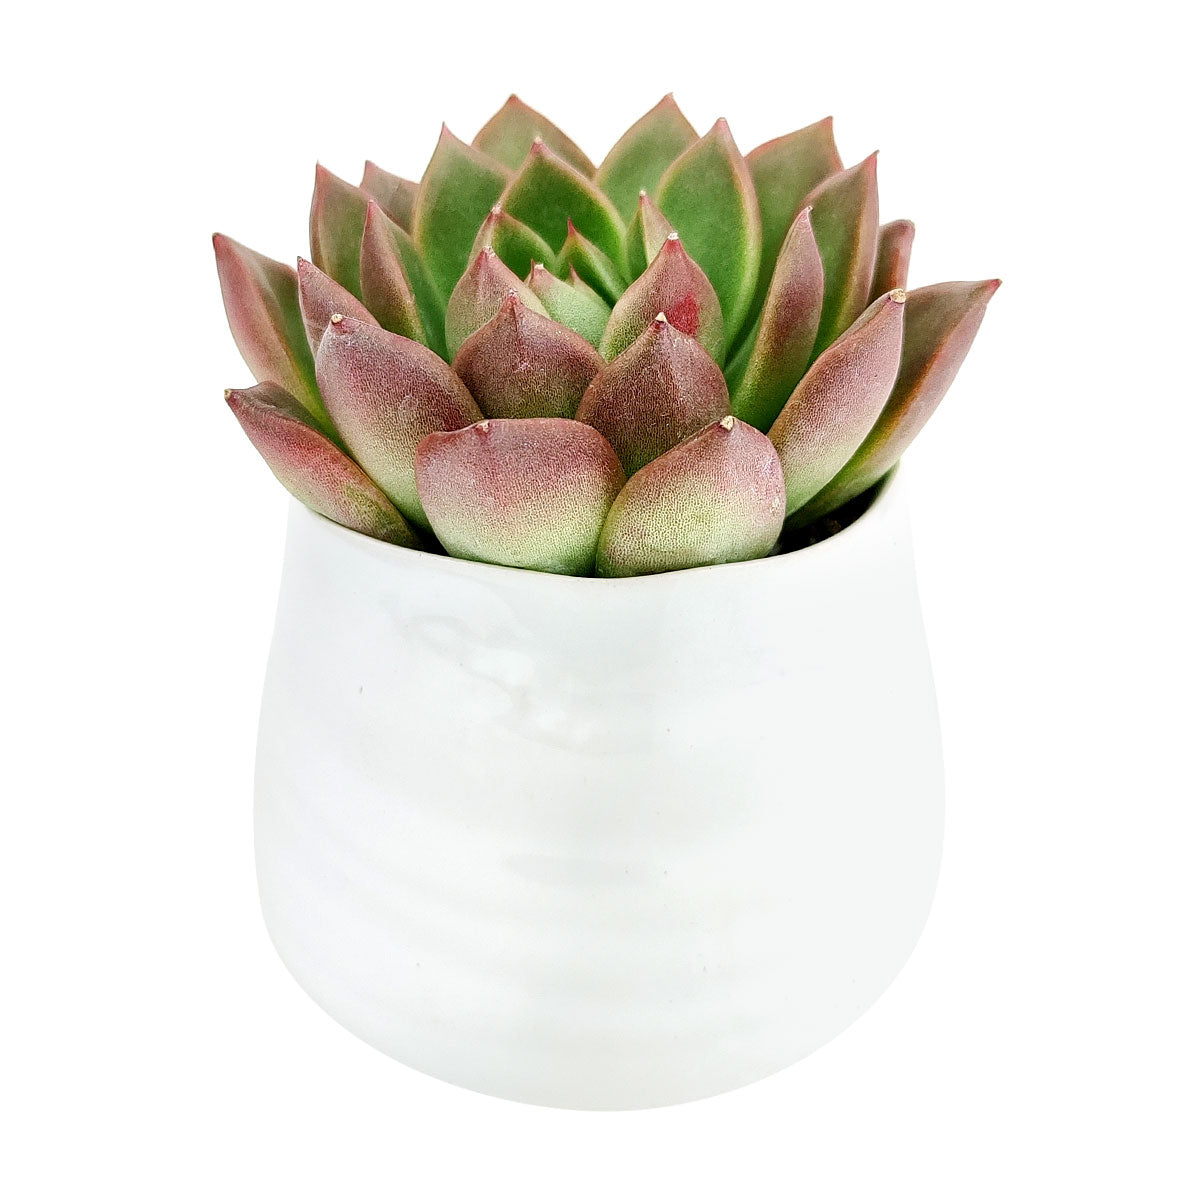 Wavy Ceramic Pot for sale, Small White Ceramic Pot for succulents and flowers, Modern style flower pot for sale, Succulent gift decor ideas